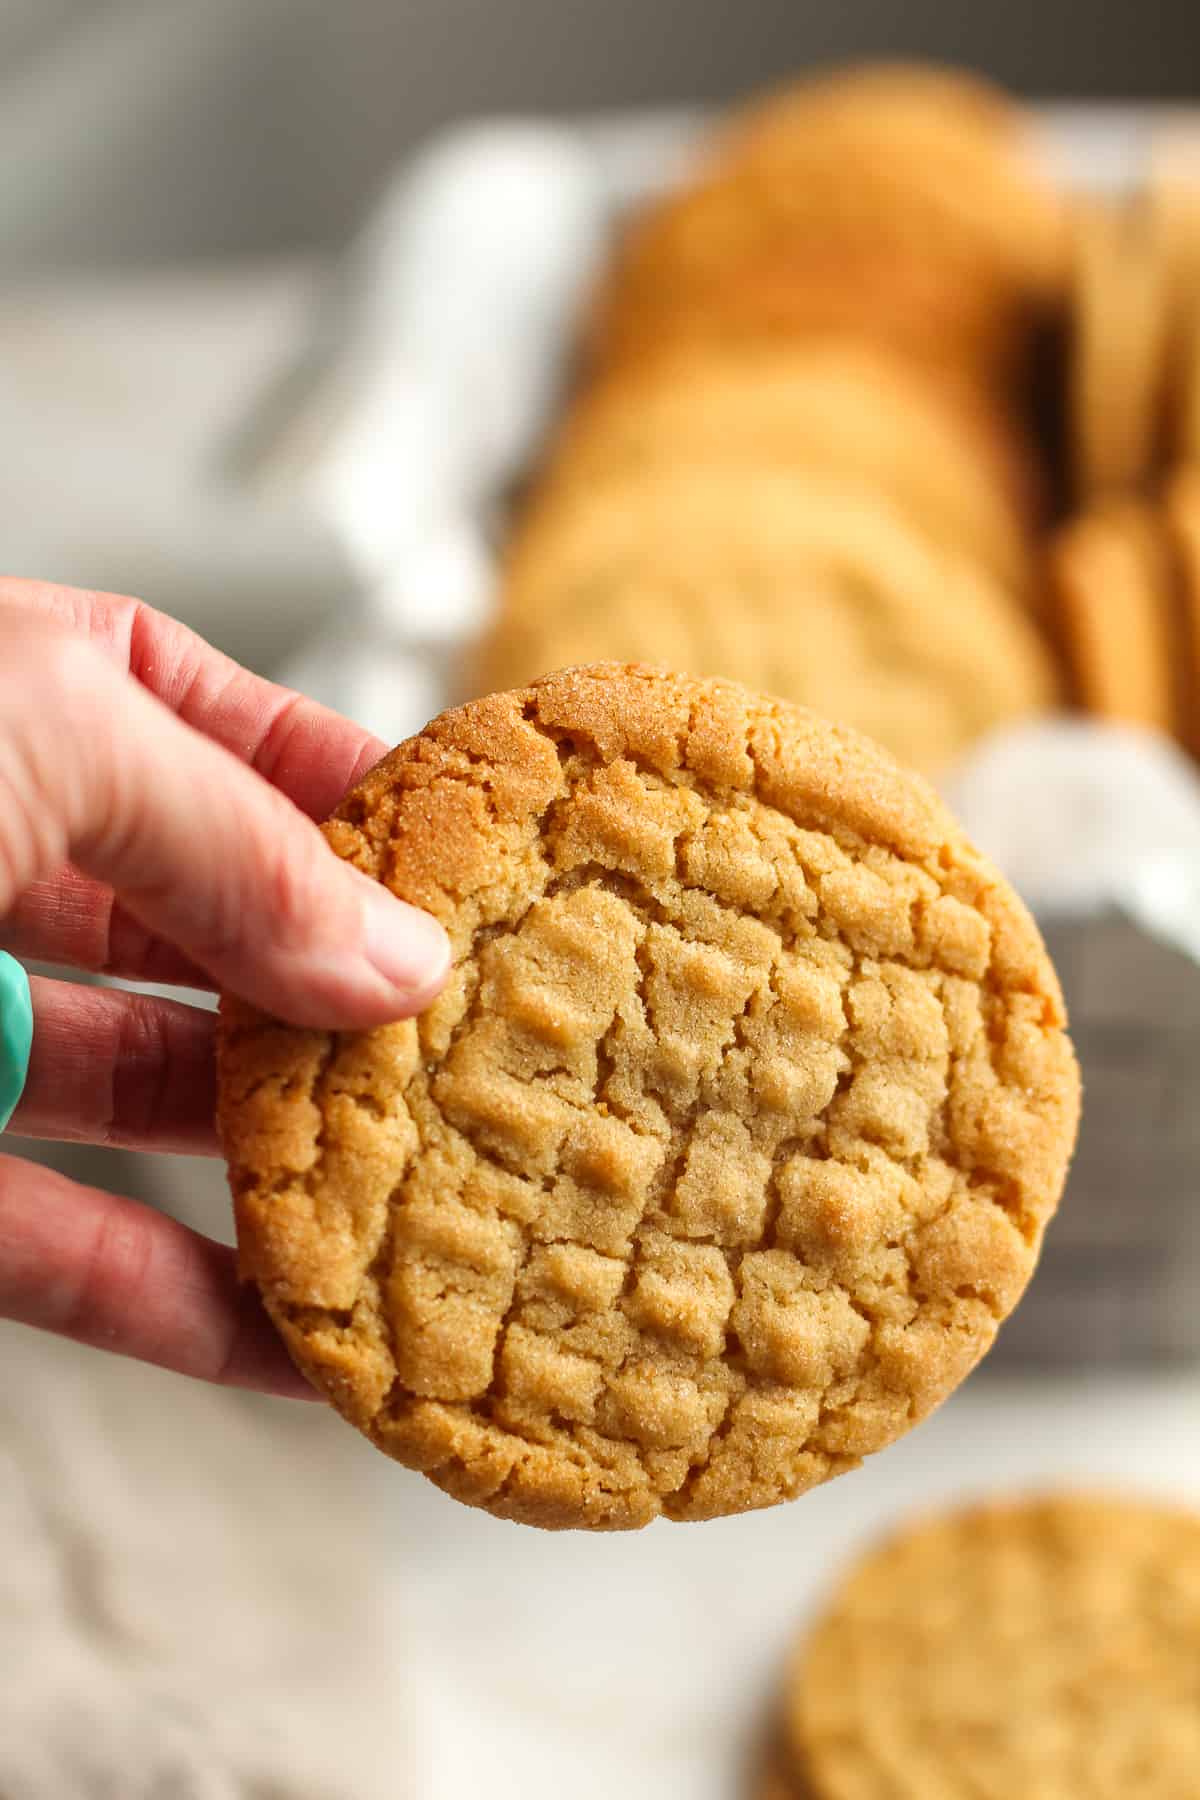 A hand holding a peanut butter cookie in front of a container of cookies.